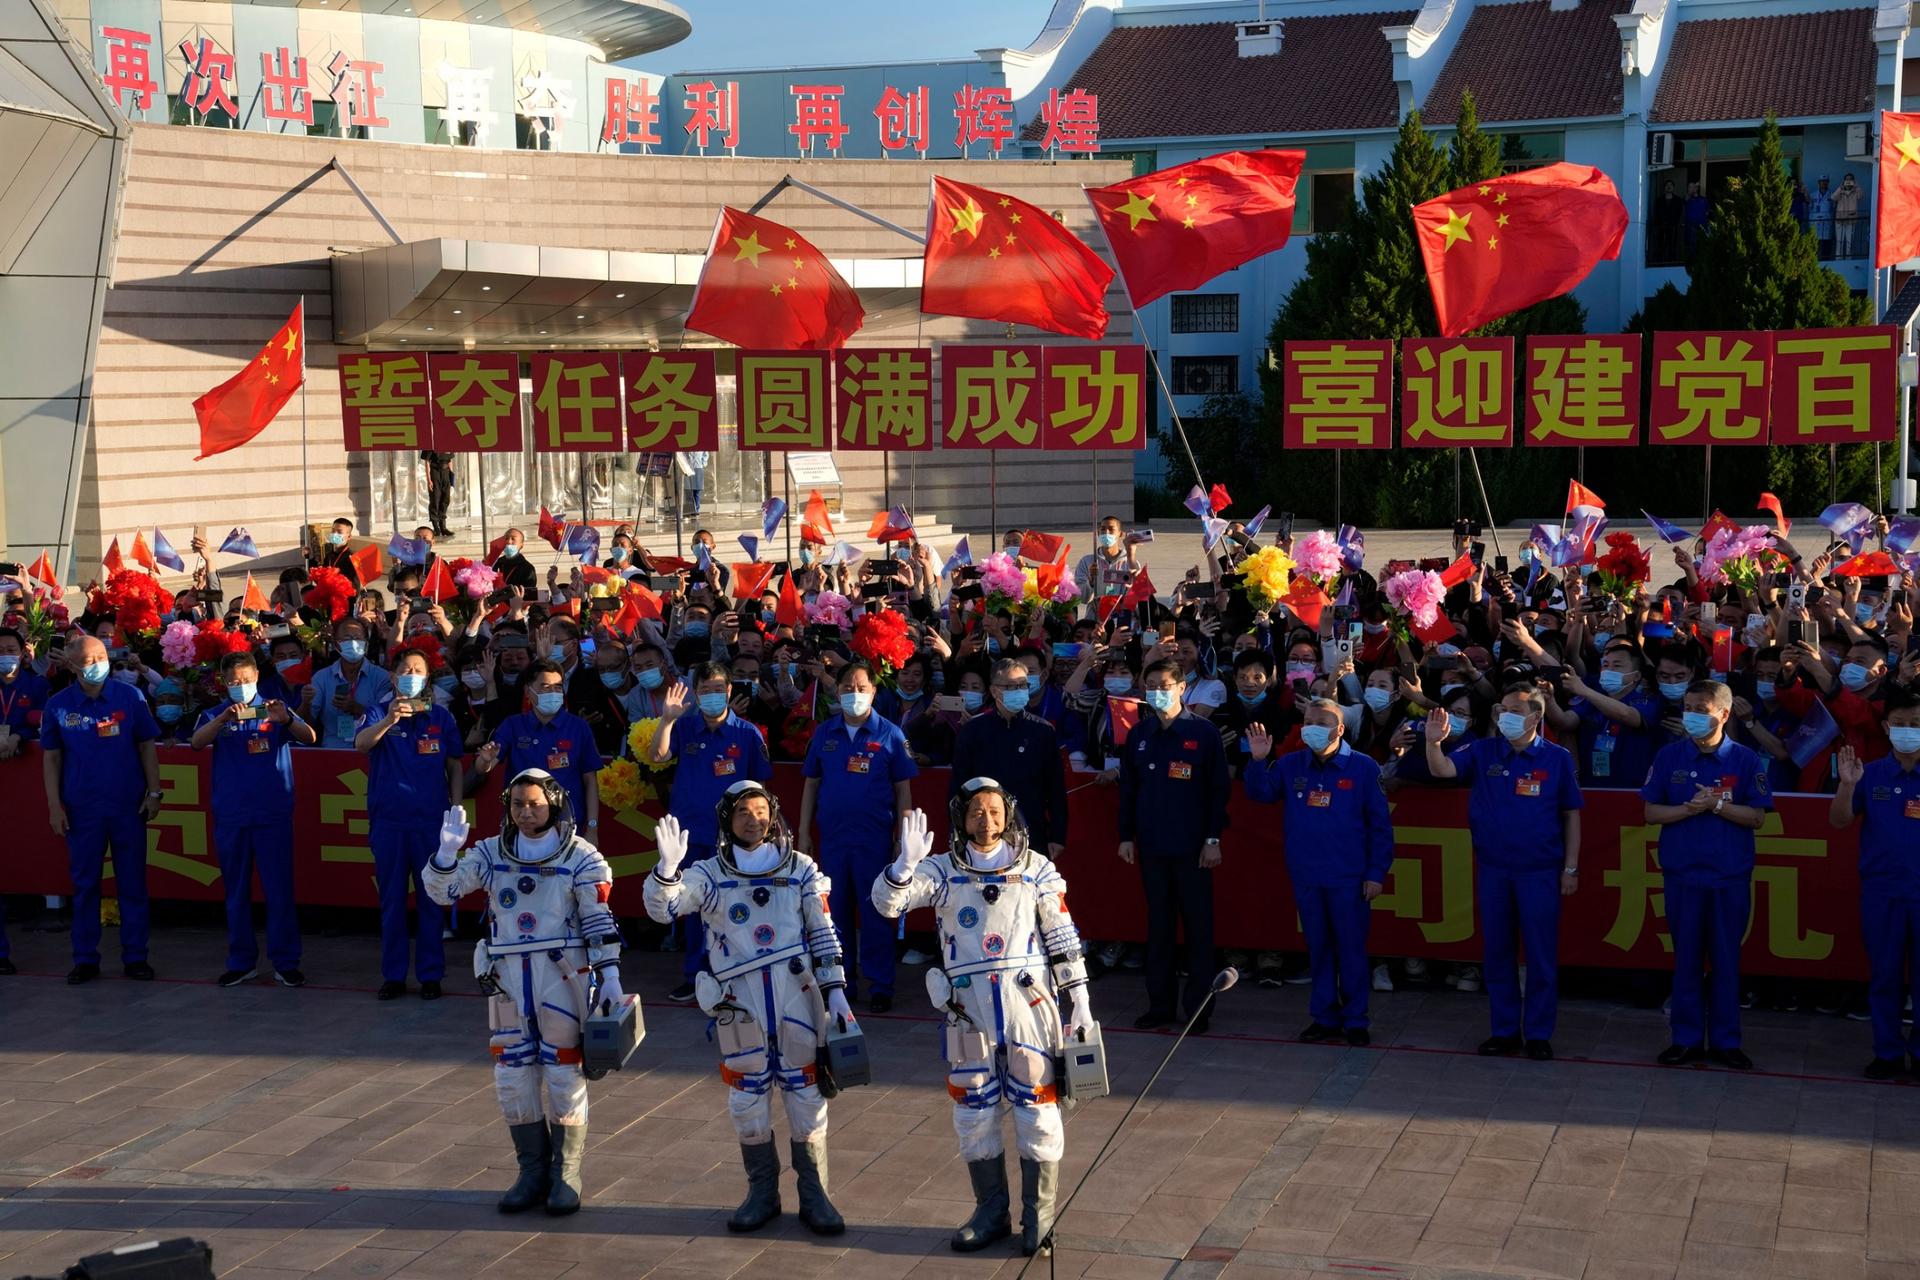 Three Chinese astronauts are shown waving with a large crowd of people waving the Chinese flag behind them.